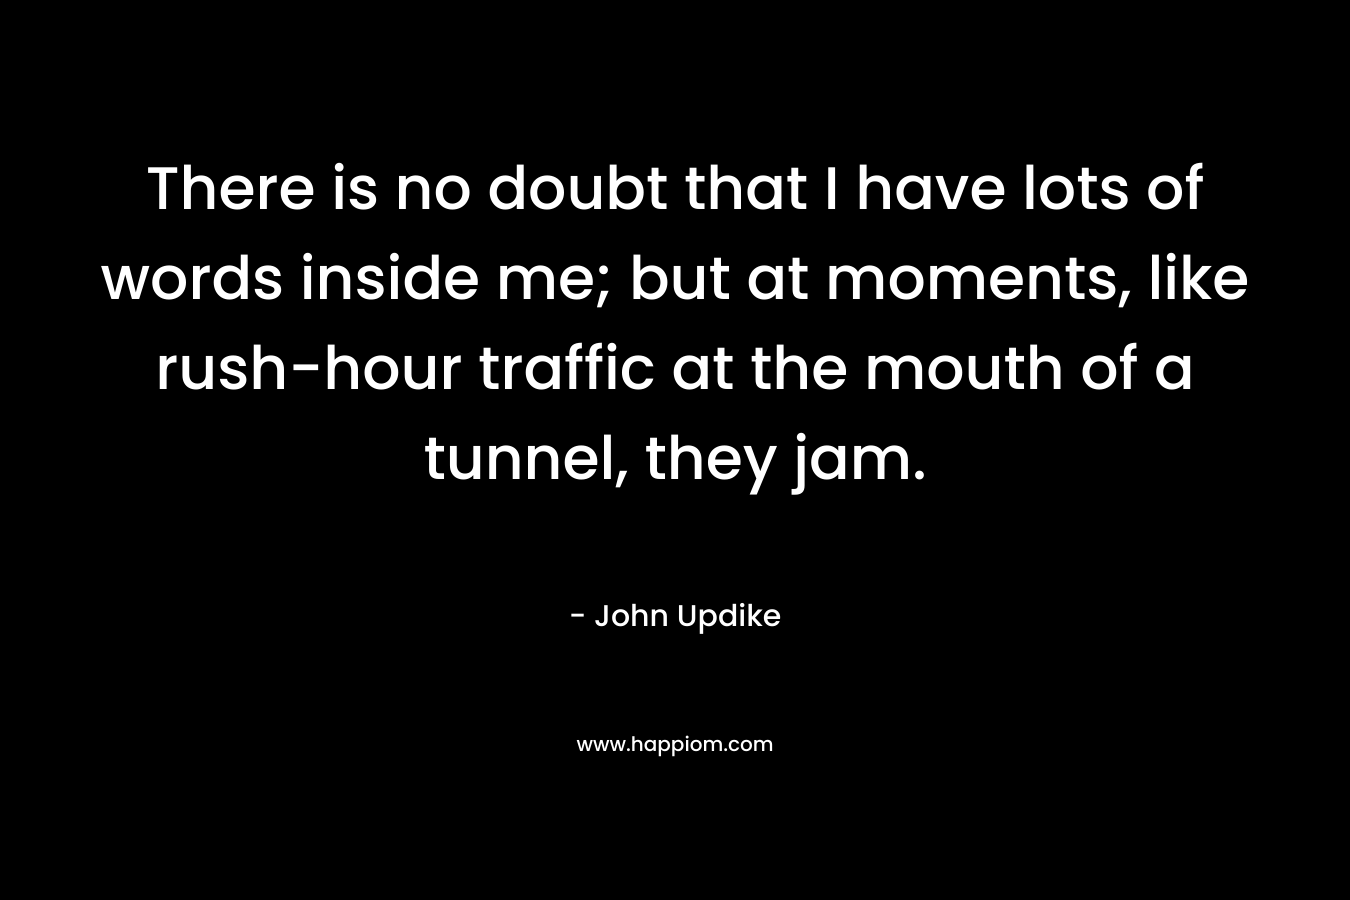 There is no doubt that I have lots of words inside me; but at moments, like rush-hour traffic at the mouth of a tunnel, they jam.